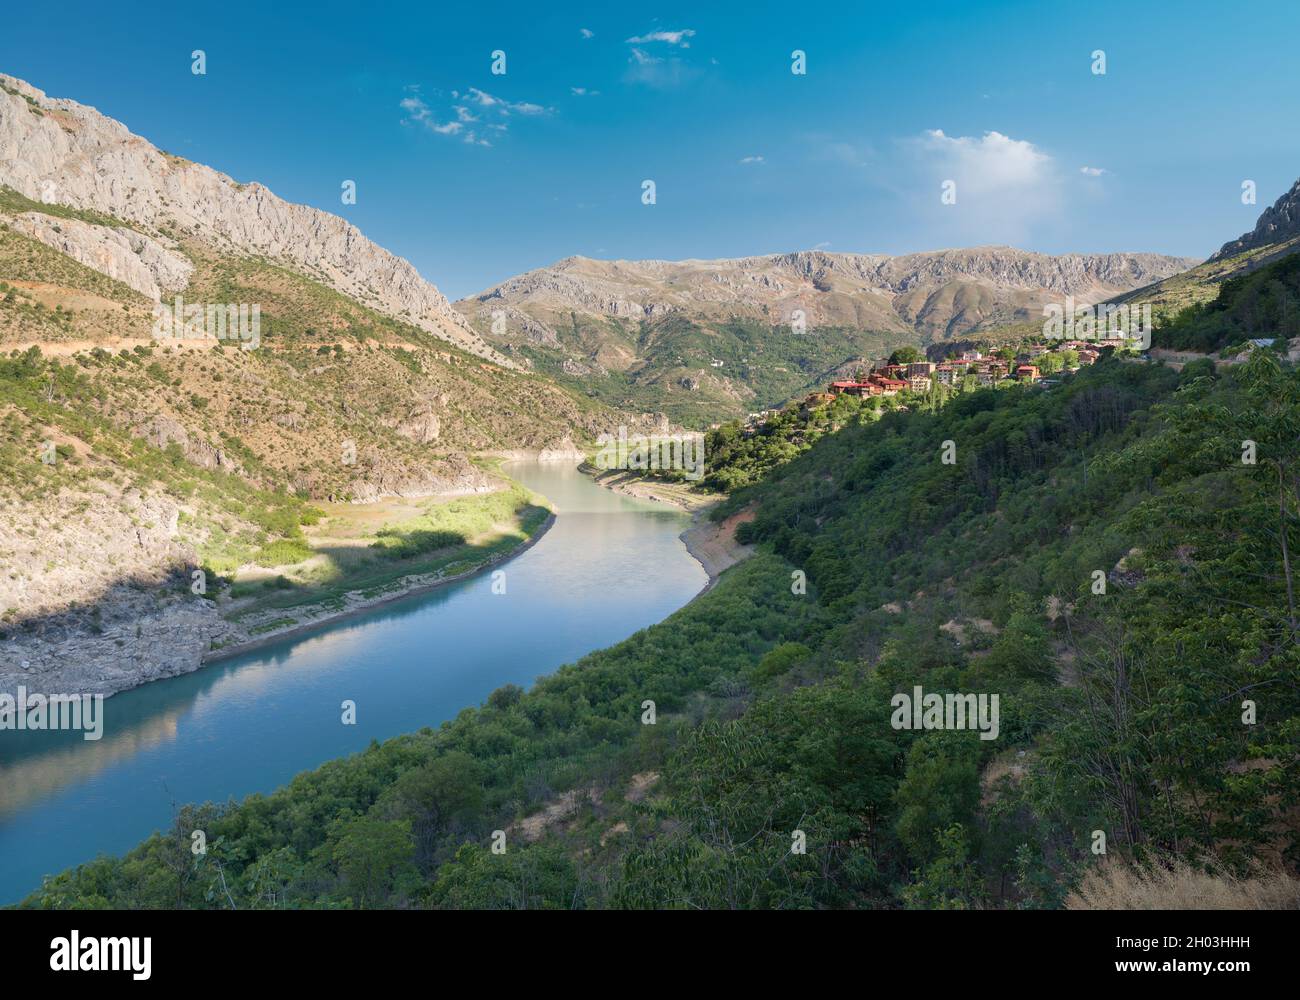 General view of the touristic town of Kemaliye. The Euphrates river flows in the valley of Kemaliye district. Stock Photo